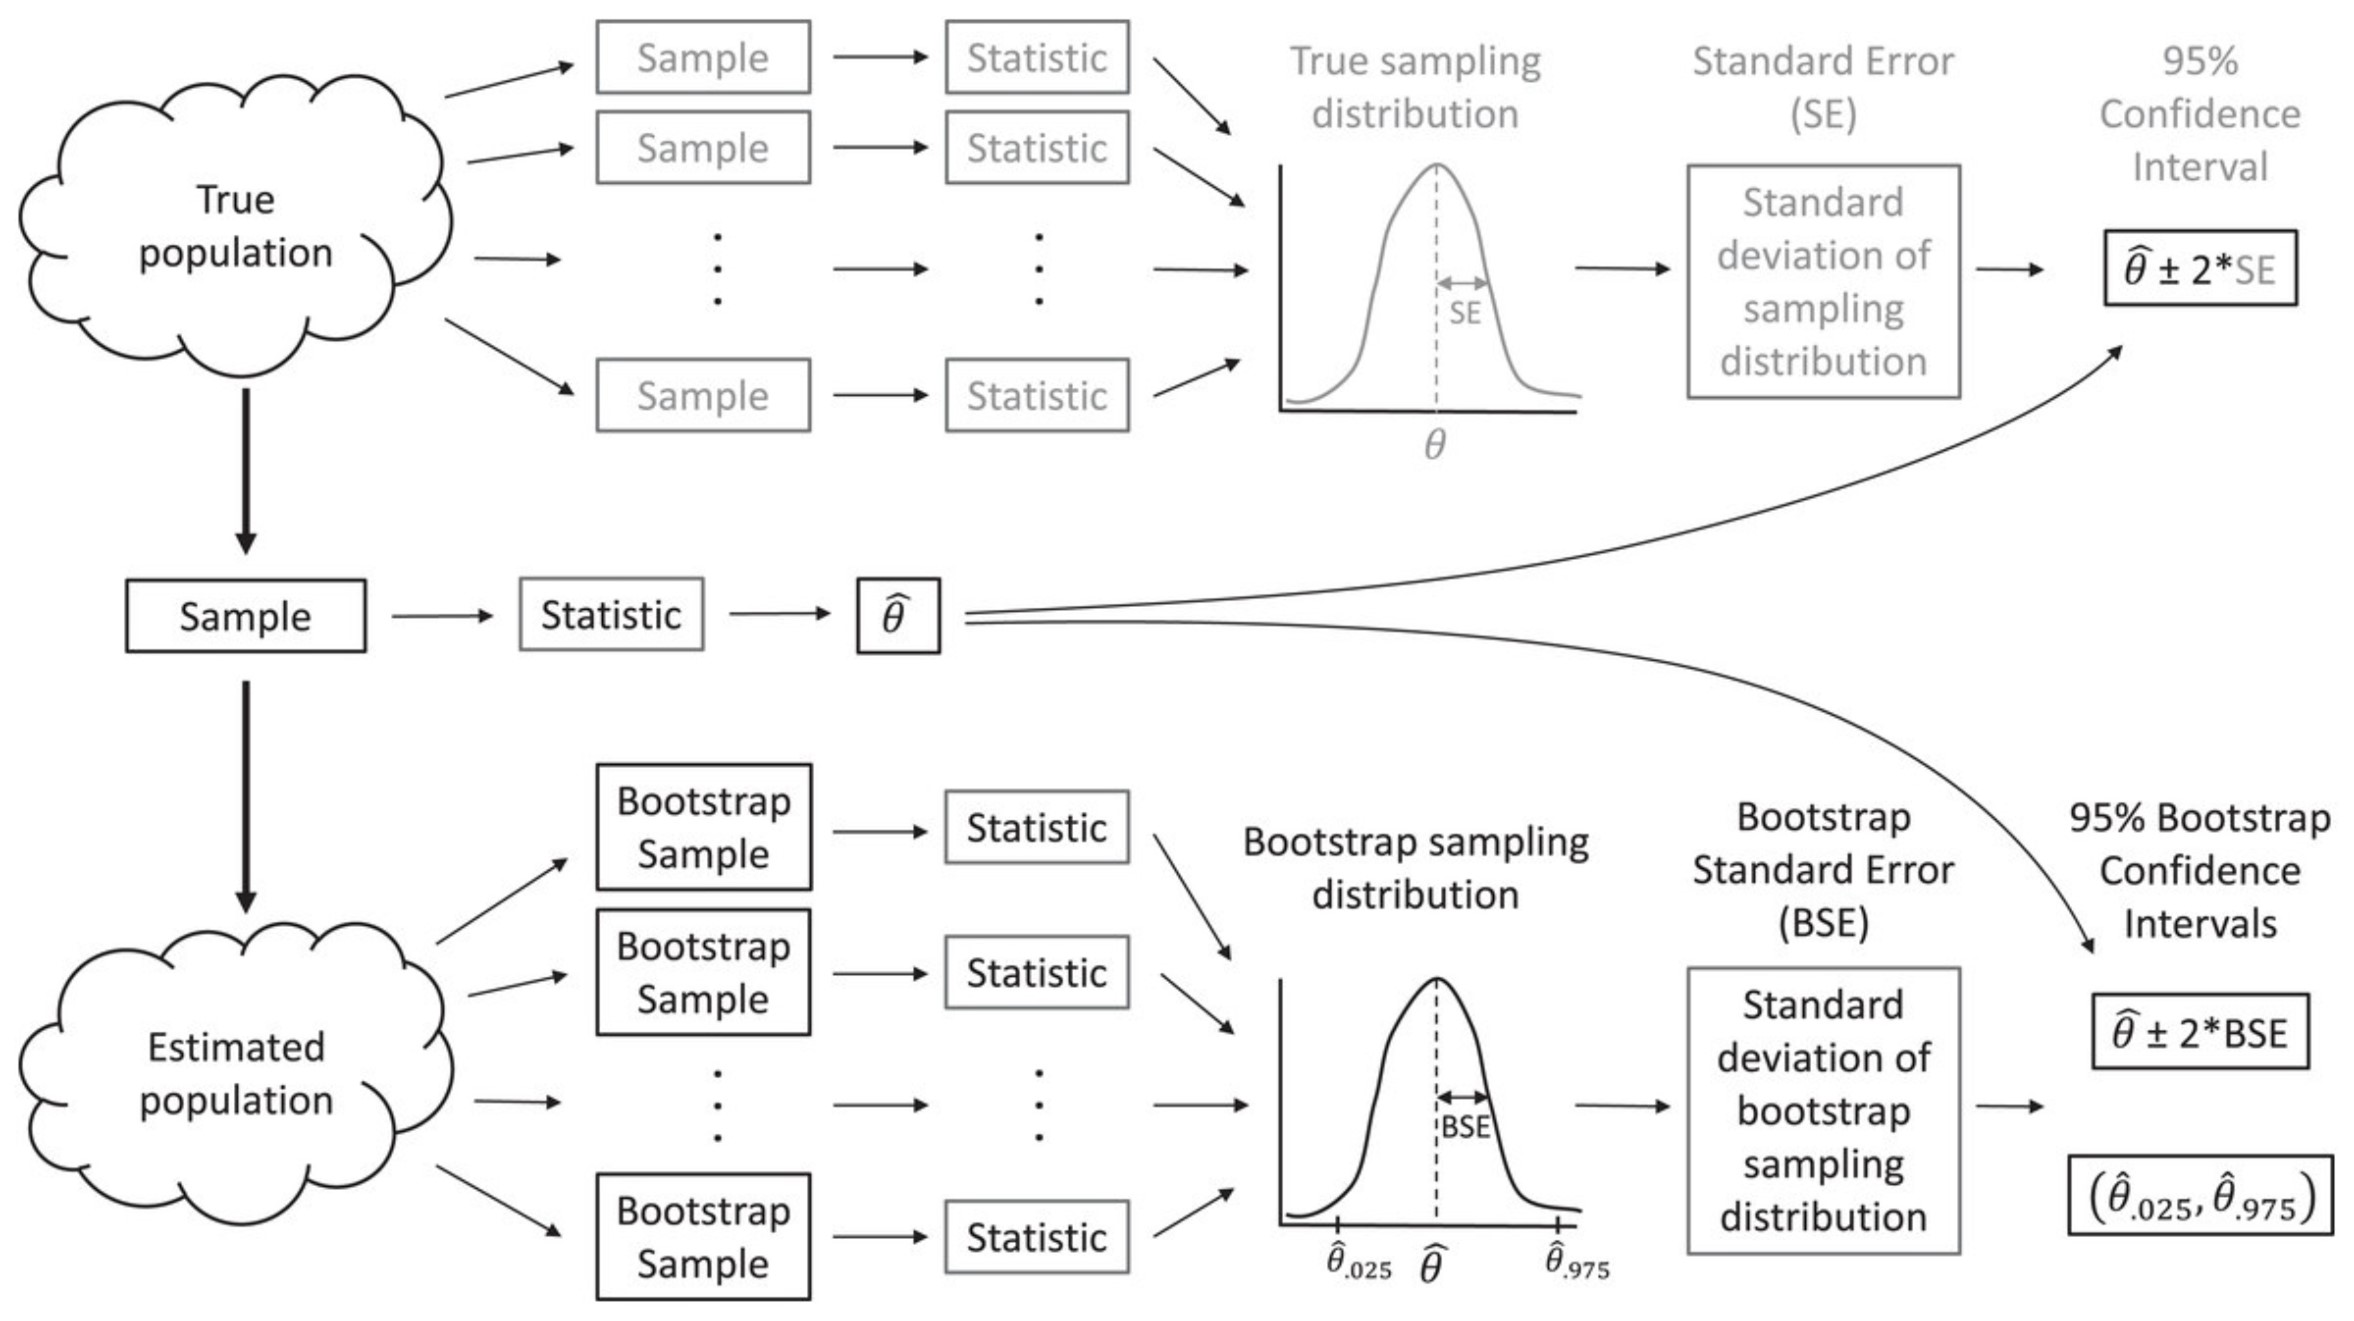 The bootstrap allows us to estimate characteristics of the sampling distribution (e.g., its standard deviation) by repeatedly sampling from an estimated population.  Figure from Fieberg, J. R., Vitense, K., and Johnson, D. H. (2020). Resampling-based methods for biologists. PeerJ, 8, e9089.  DOI: 10.7717/peerj.9089/fig-2.